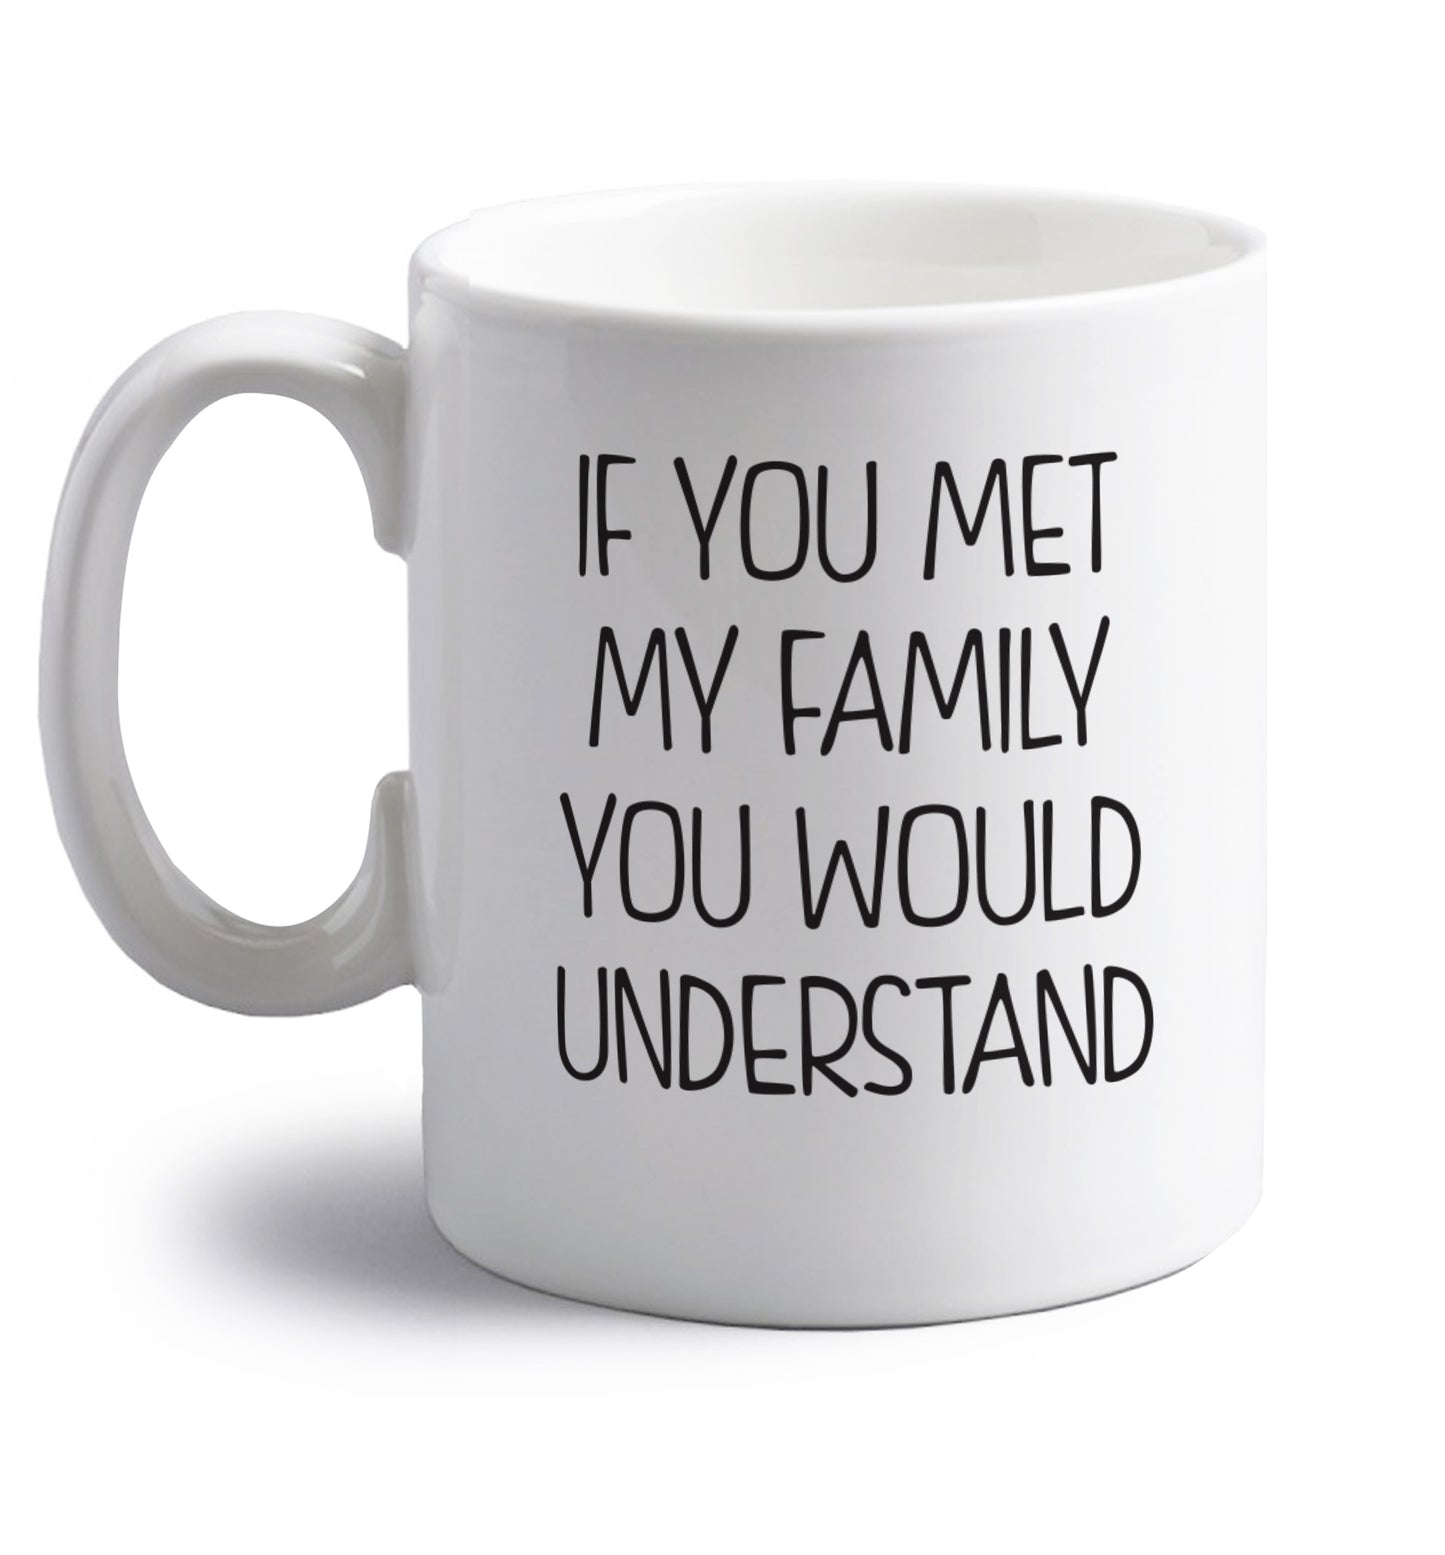 If you met my family you would understand right handed white ceramic mug 